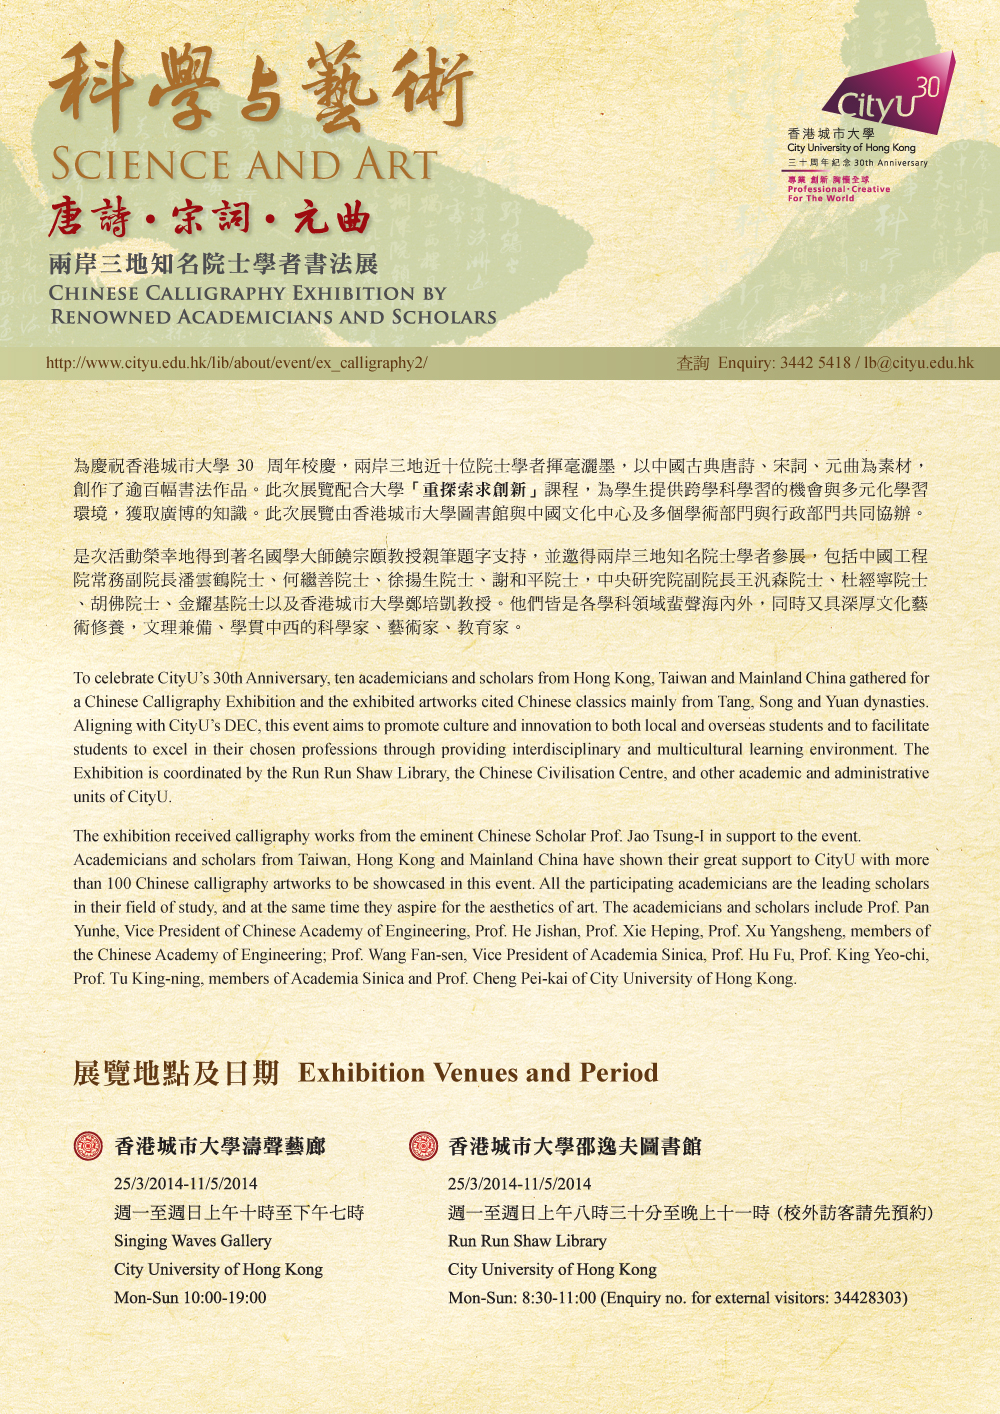 Event: Science and Art: Chinese Calligraphy Exhibition by Renowned Academicians and Scholars科學與藝術‧唐詩、宋詞、元曲 -- 兩岸三地知名院士學者書法展
        Venue: Singing Waves Gallery, City University of Hong Kong
        Date: 25 March 2014 to 11 May 2014
        Time: Monday - Sunday, 10:00 am - 7:00 pm
        Venue 2: Run Run Shaw Library, City University of Hong Kong
        Date: 25 March 2014 to 11 May 2014
        Time: Monday - Sunday, 8:30 am - 11:00 am
        Enquiry: 3442-5418
        Enquiry for external visitors: 3442-8303
        Email: lb@cityu.edu.hk